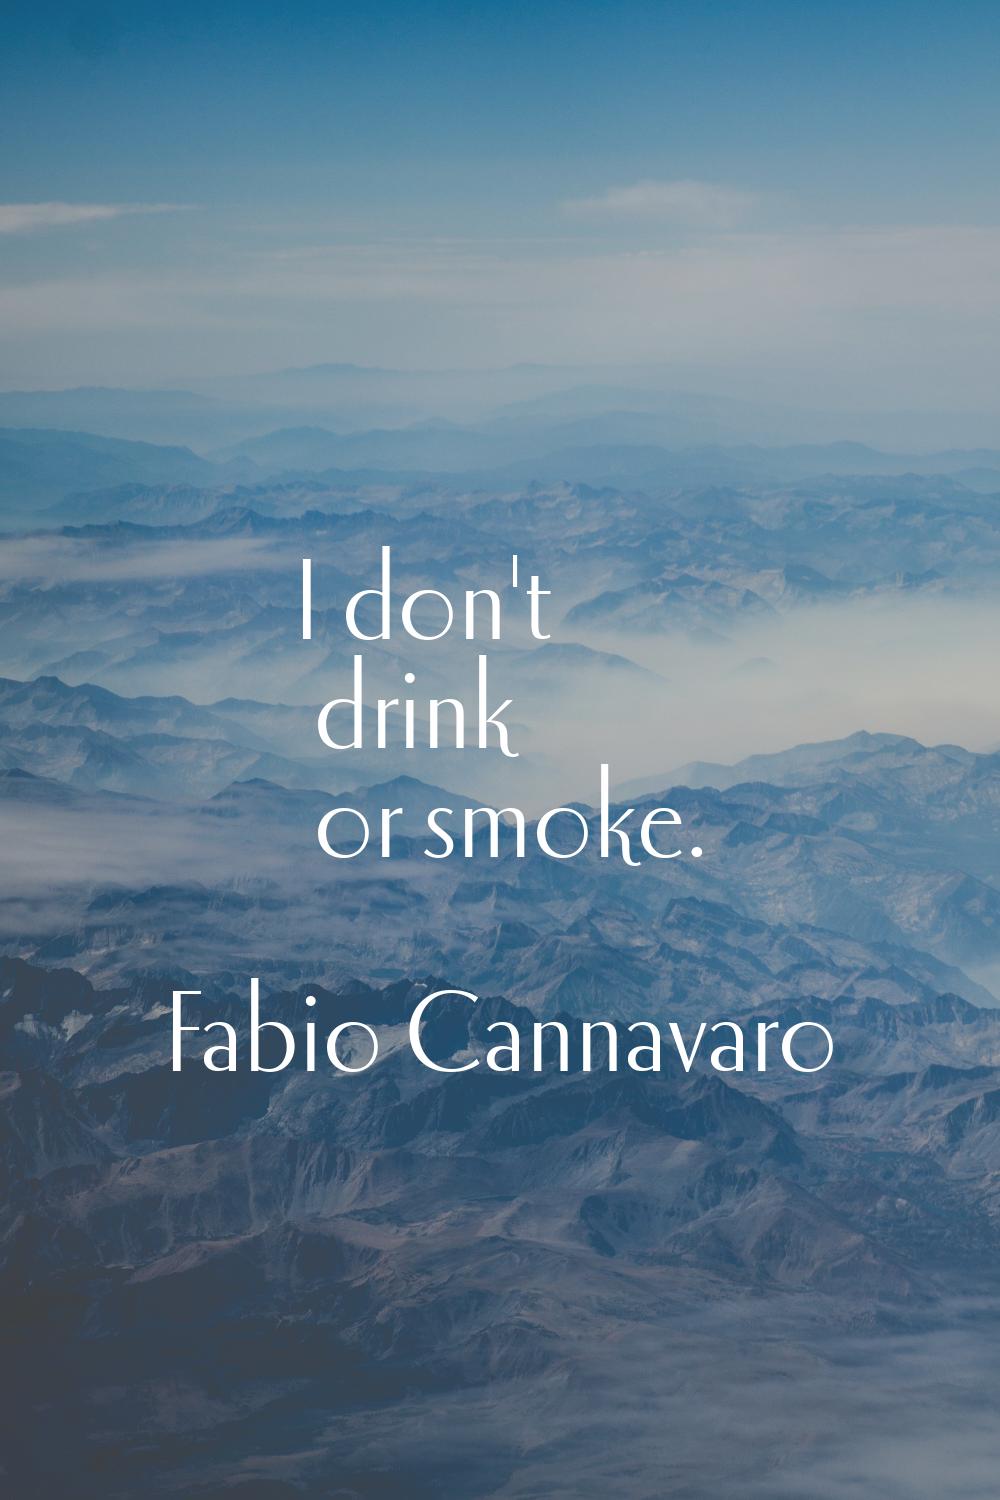 I don't drink or smoke.